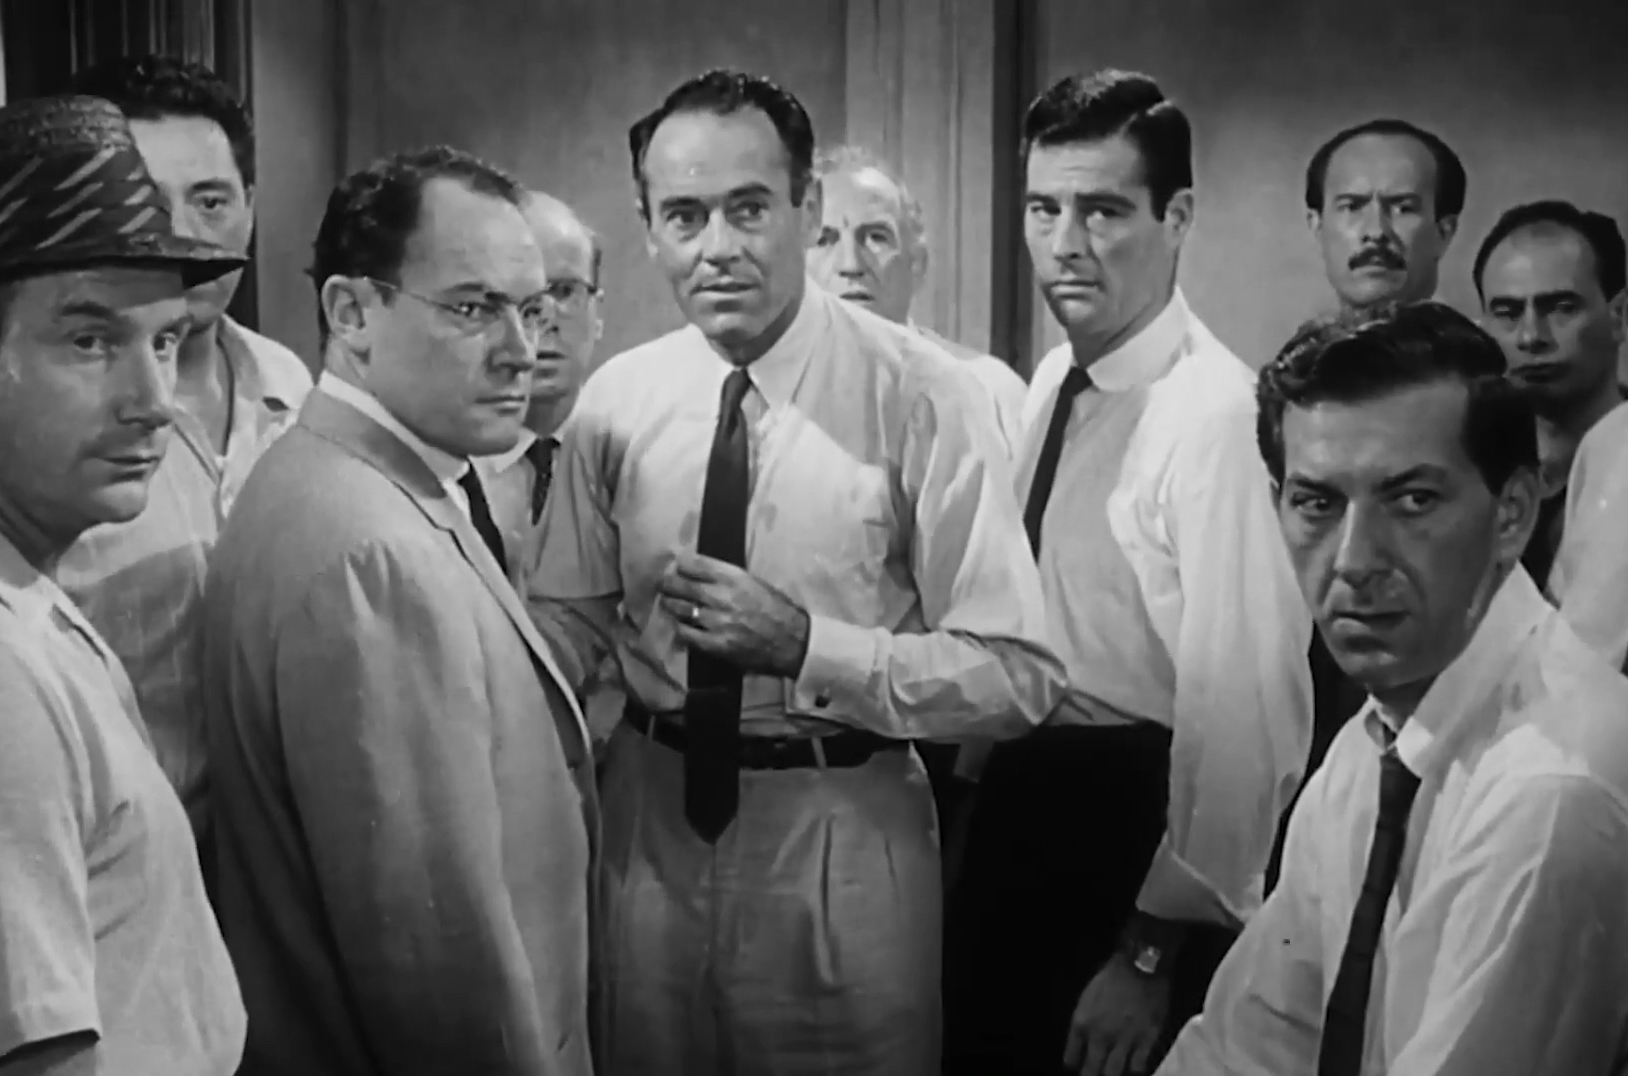 Black and white photo of group of men from the 1950s, all in white shirts with dark ties, looking serious.